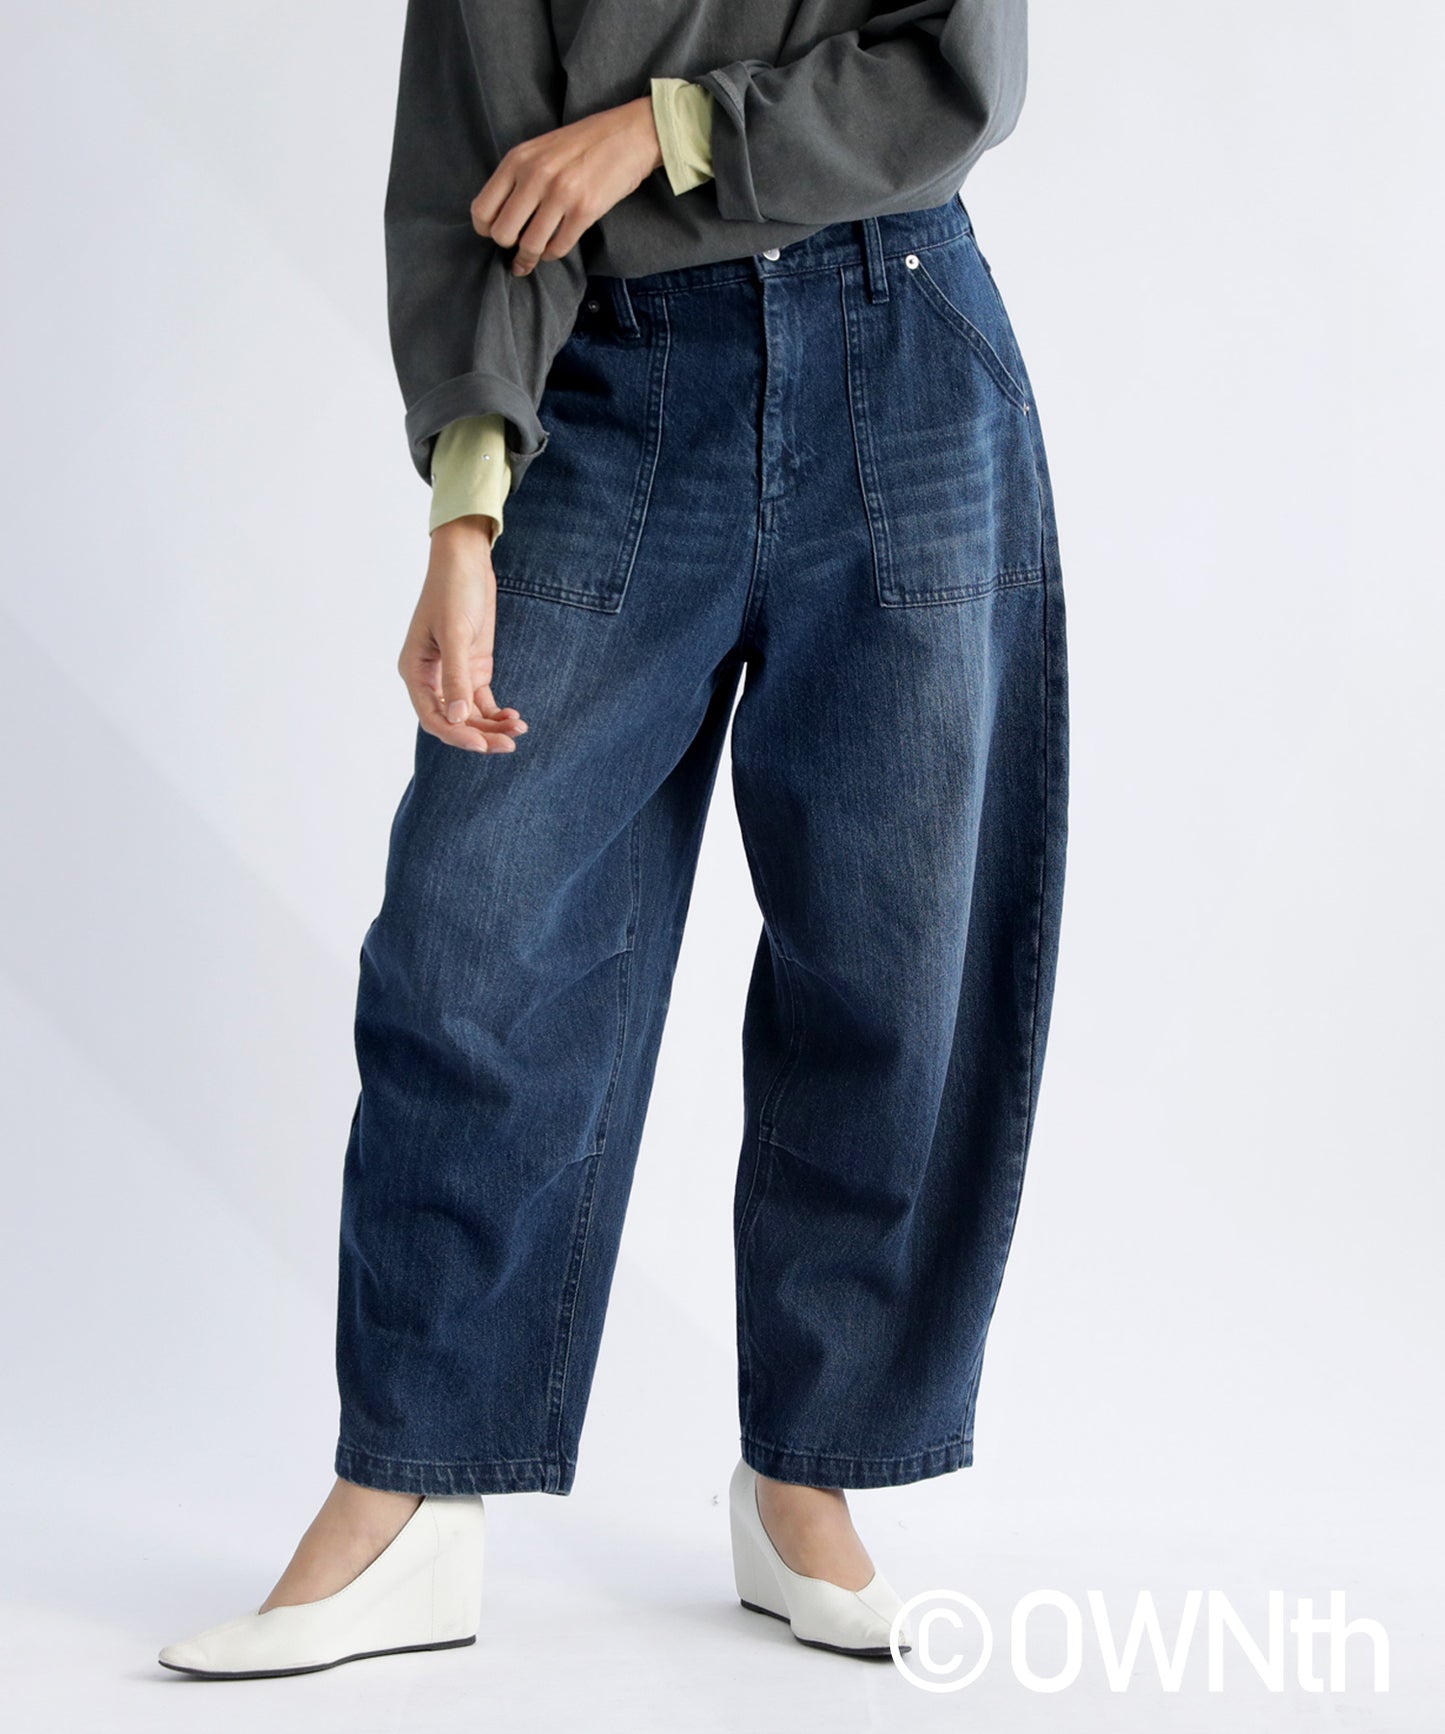 OWNth Back Embroidery Denim Balloon Pants Unisex